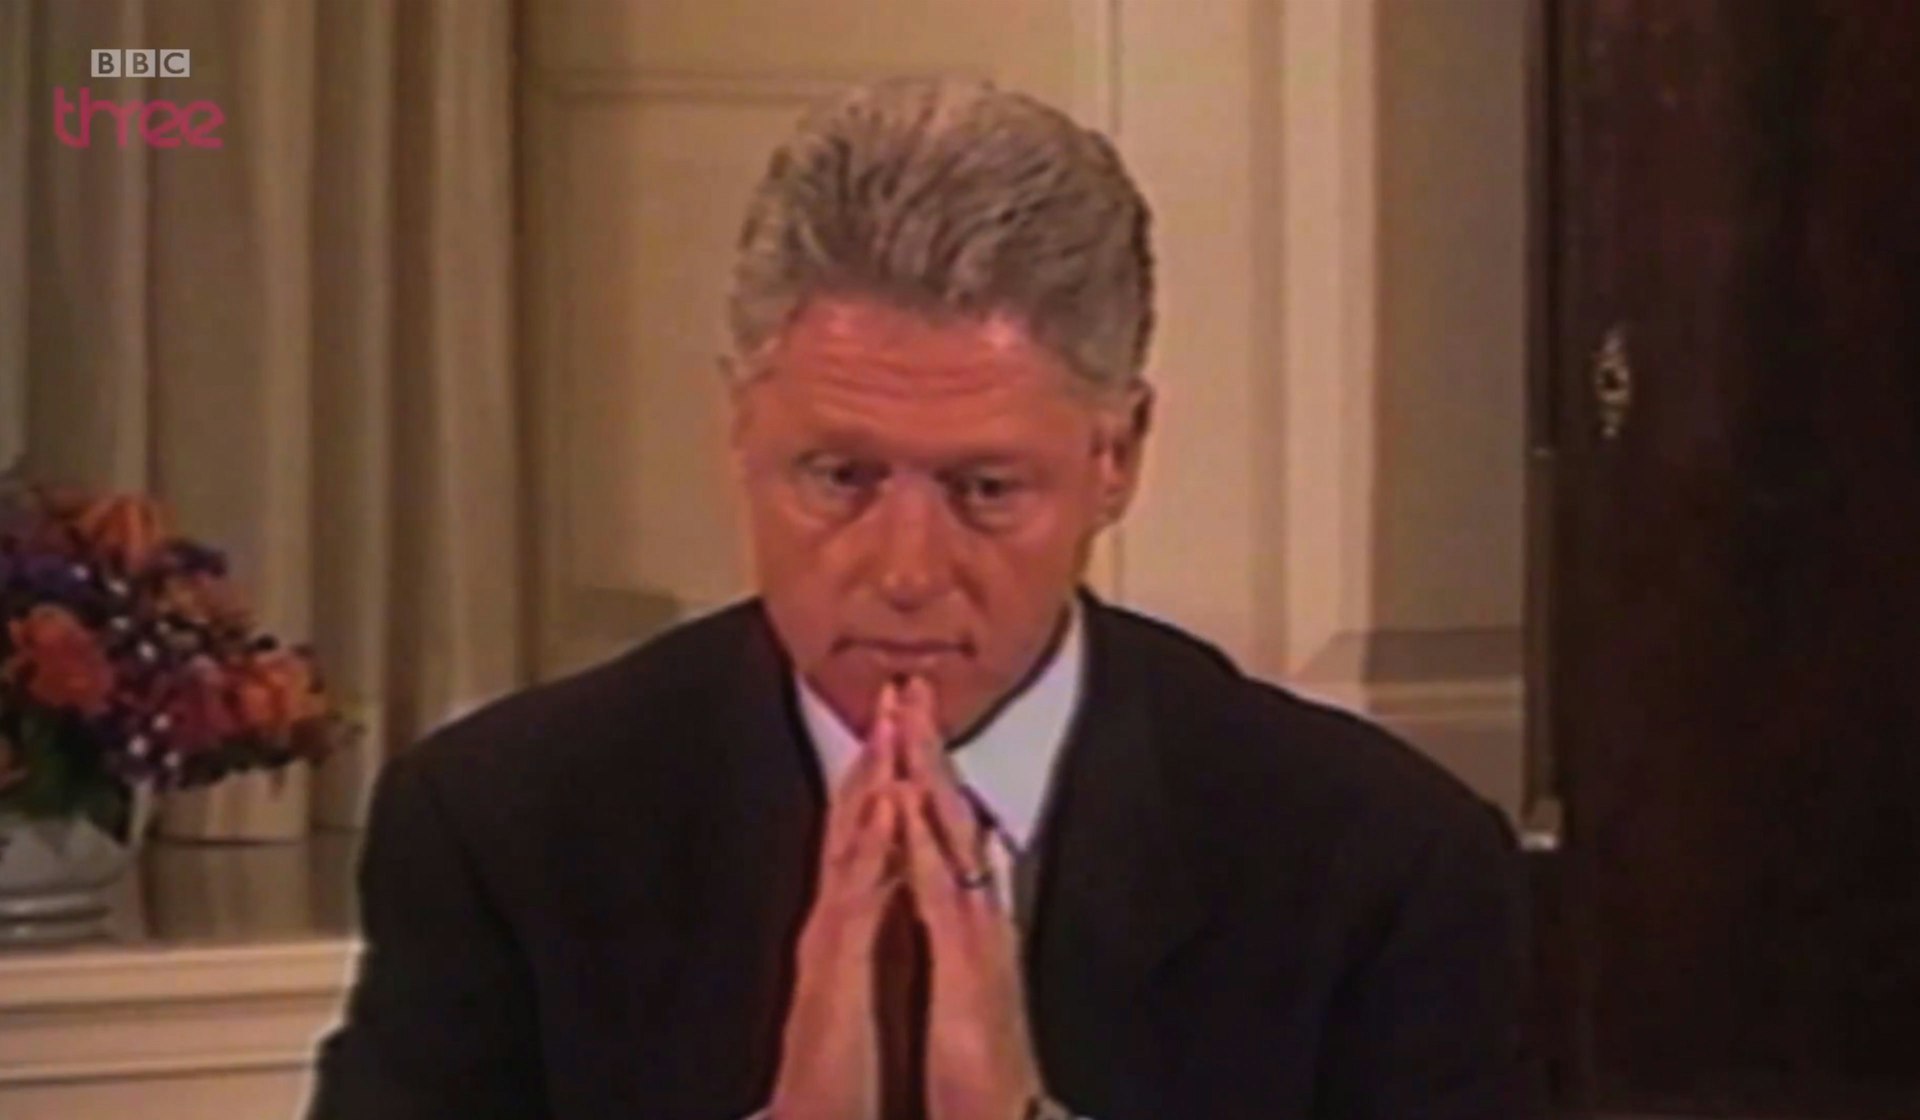 Bill Clinton quizzed on escaping an embarrassing relationship